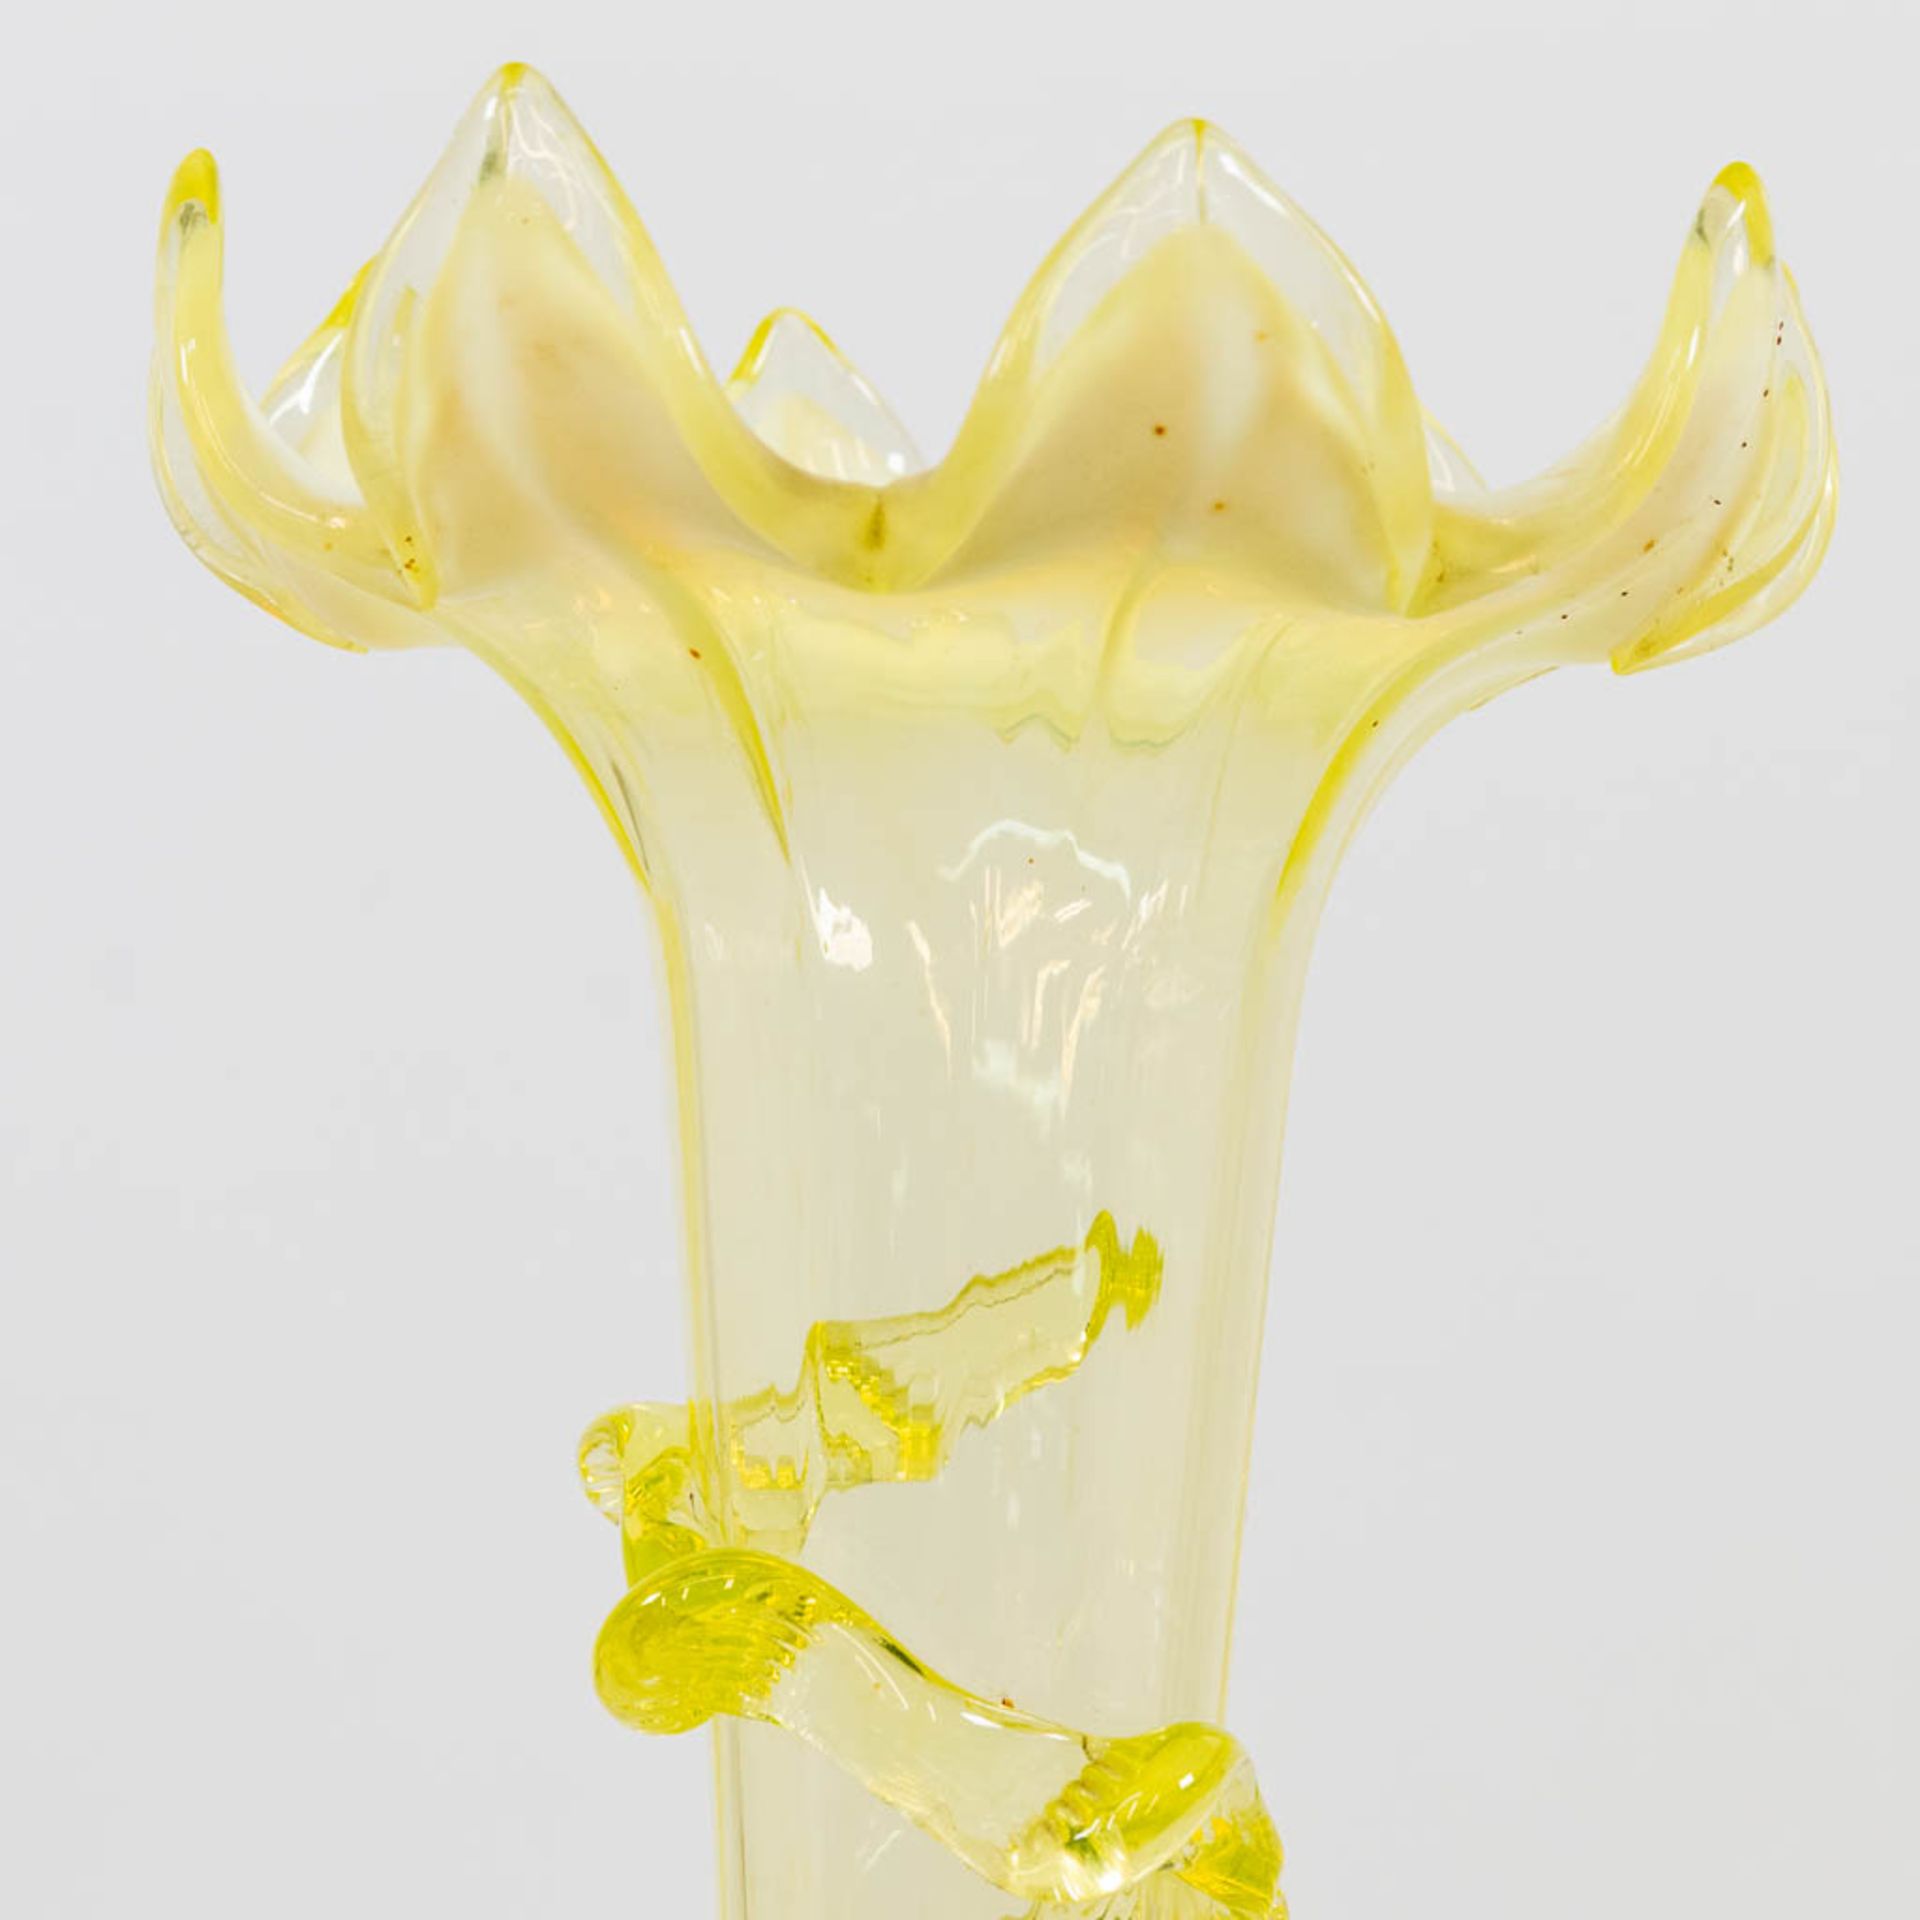 A yellow and clear glass table centrepiece pic-fleur, made in Murano, Italy. (25 x 28 x 45 cm) - Image 9 of 15